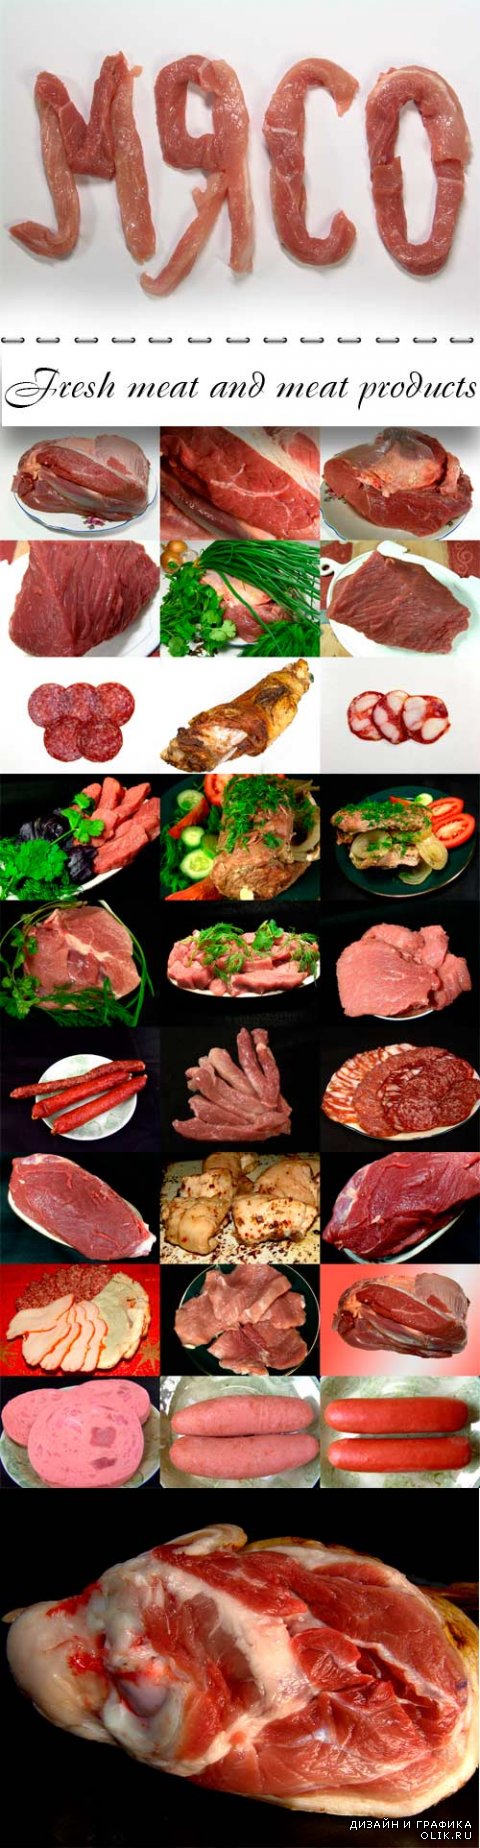 Fresh meat and meat products